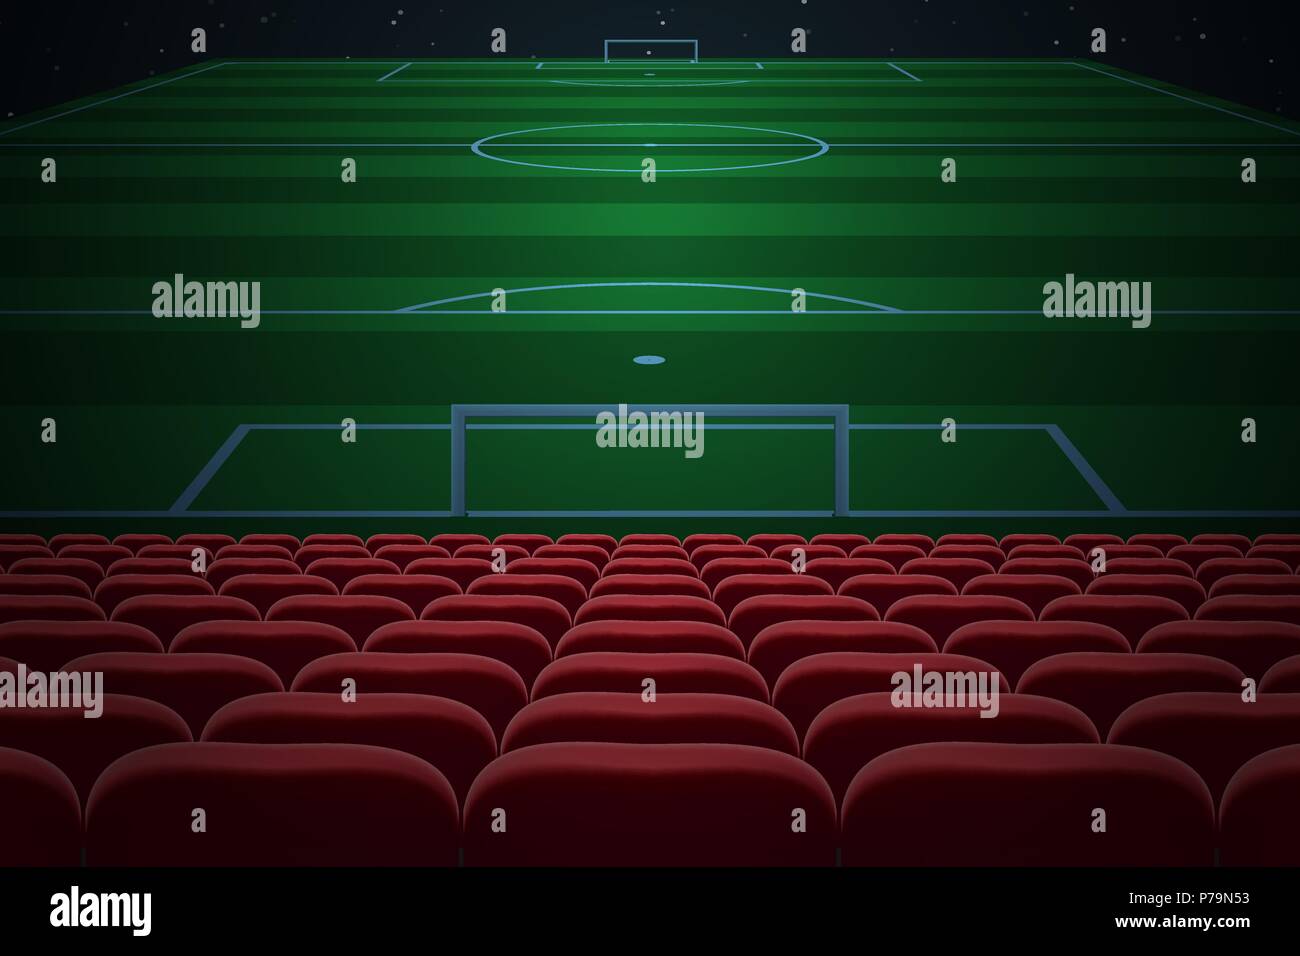 Rows of red seats on football stadium. Soccer background Stock Vector